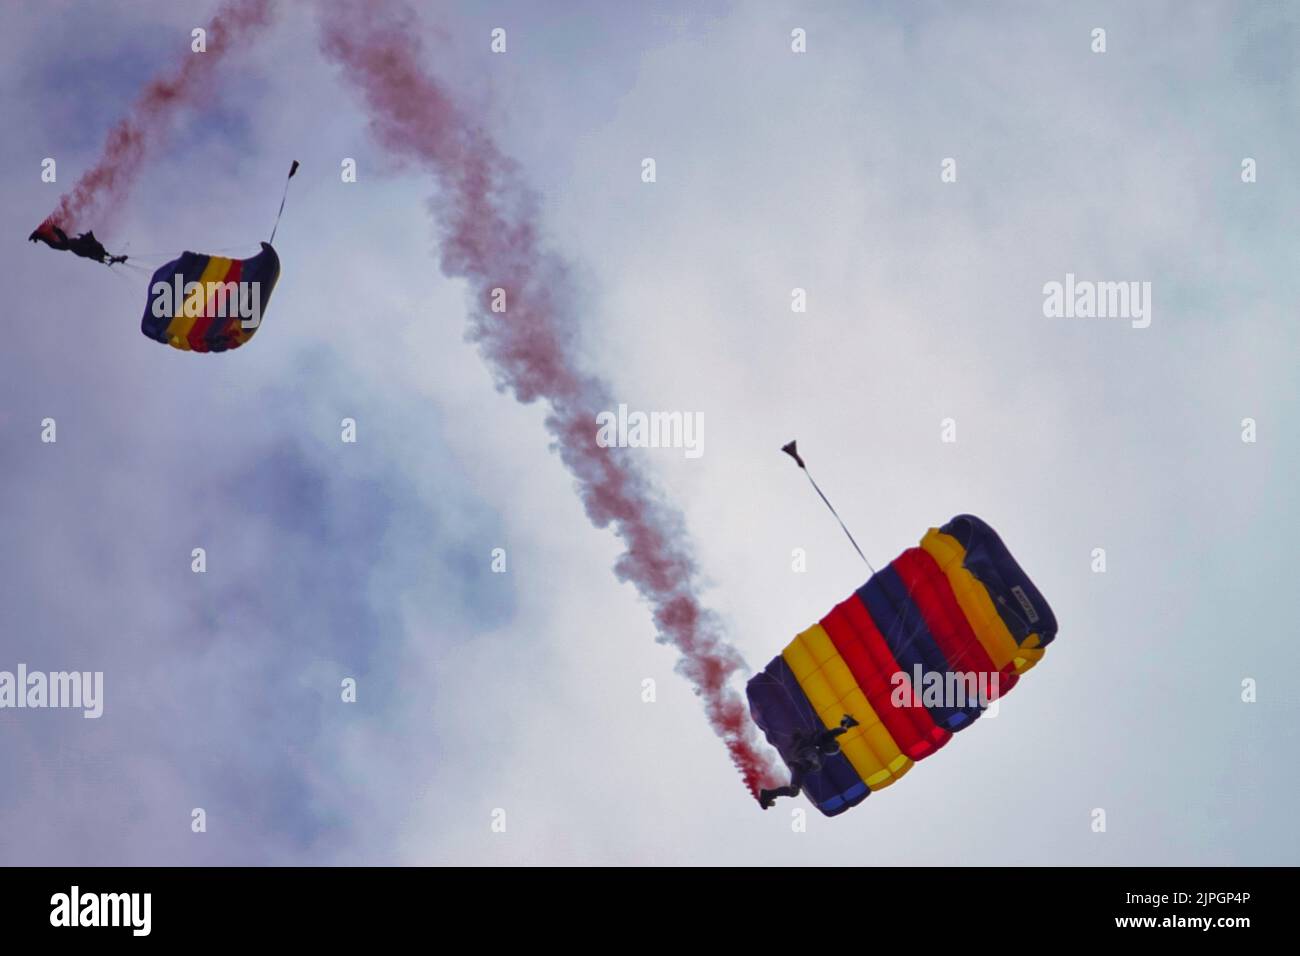 Farnborough, Hants, UK. 18th Aug, 2022. The British Army Lightning Bolts make parachute landings on the Cinch arena during the 2022 British Motor Show, held on the site of the famous Farnborough Airshow Credit: Motofoto/Alamy Live News Stock Photo